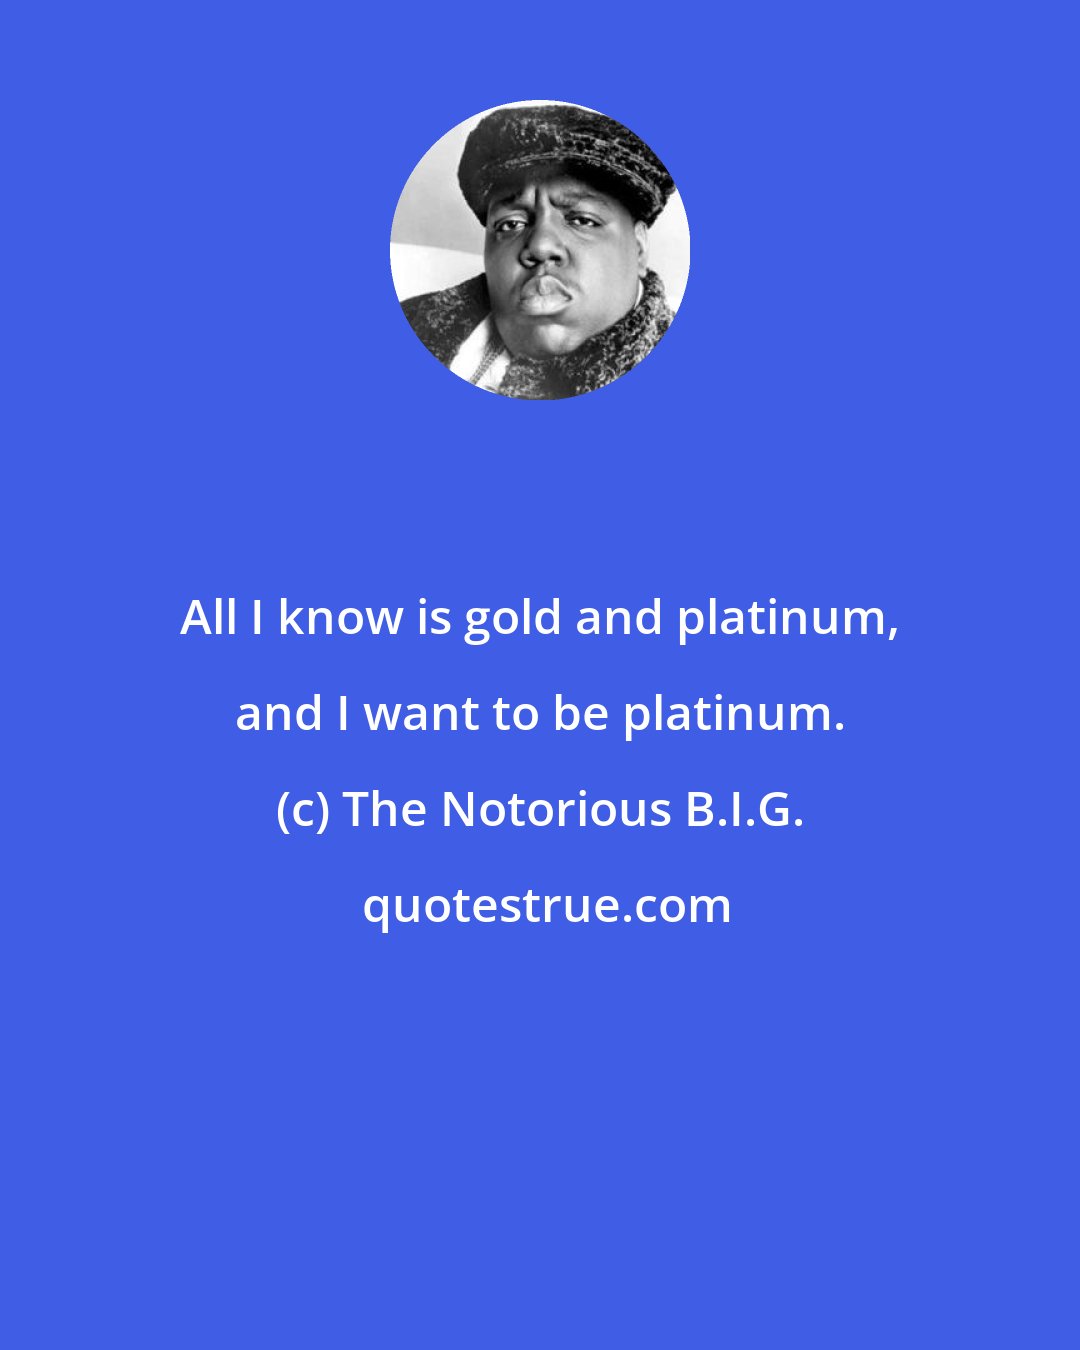 The Notorious B.I.G.: All I know is gold and platinum, and I want to be platinum.